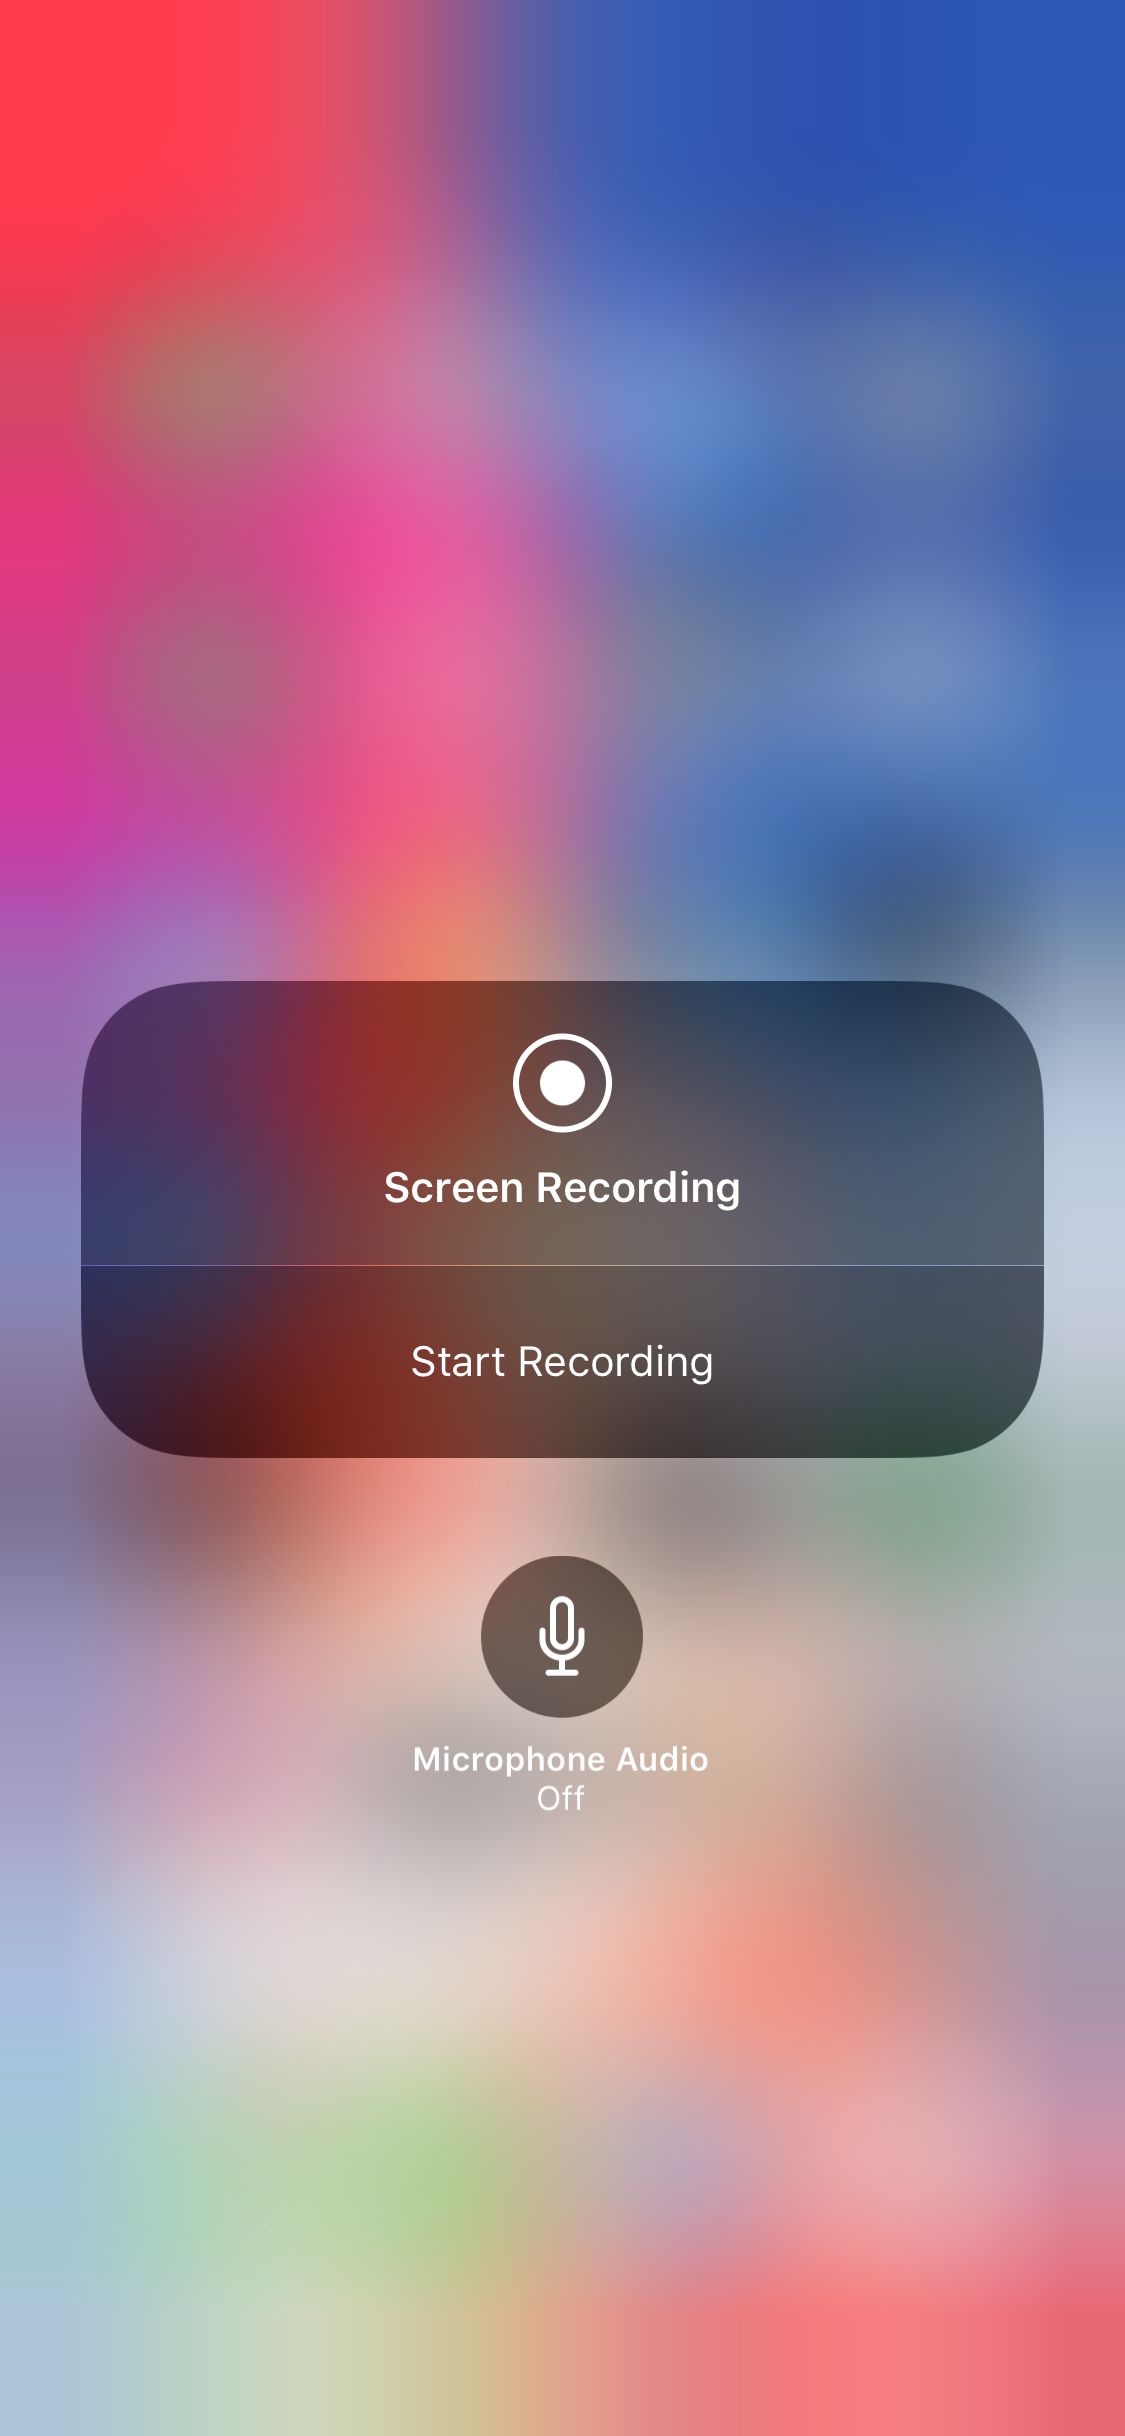 how to do screen recording on iphone